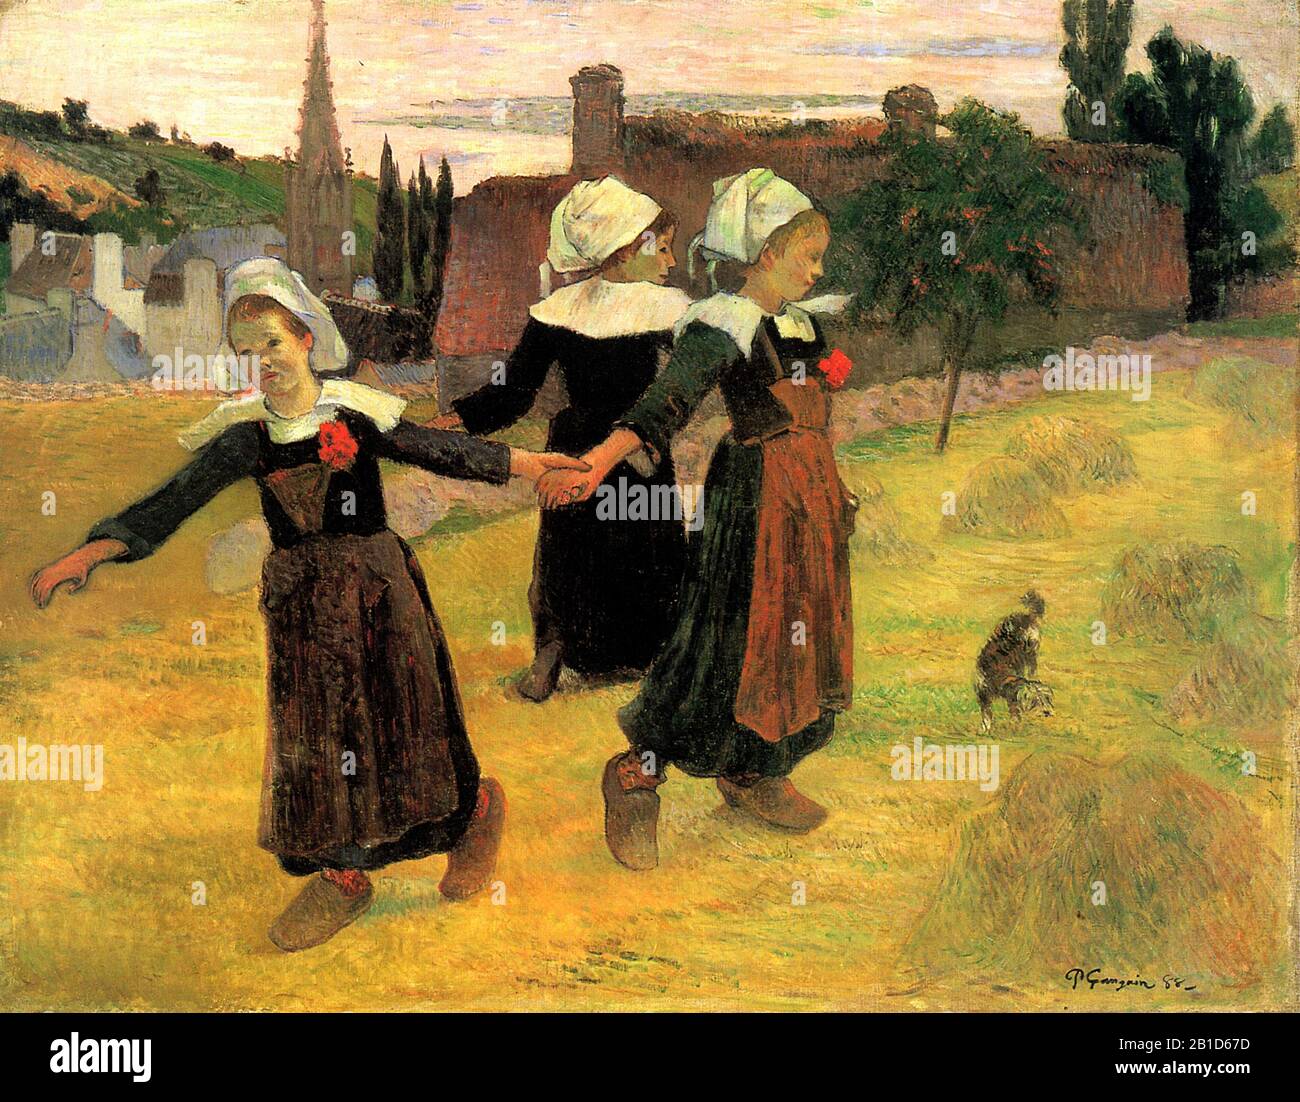 Breton Girls Dancing, Pont-Aven 1888 (The Dance of the Little Breton Women) 19th Century Paul Gauguin Painting, Very high resolution and quality image Stock Photo